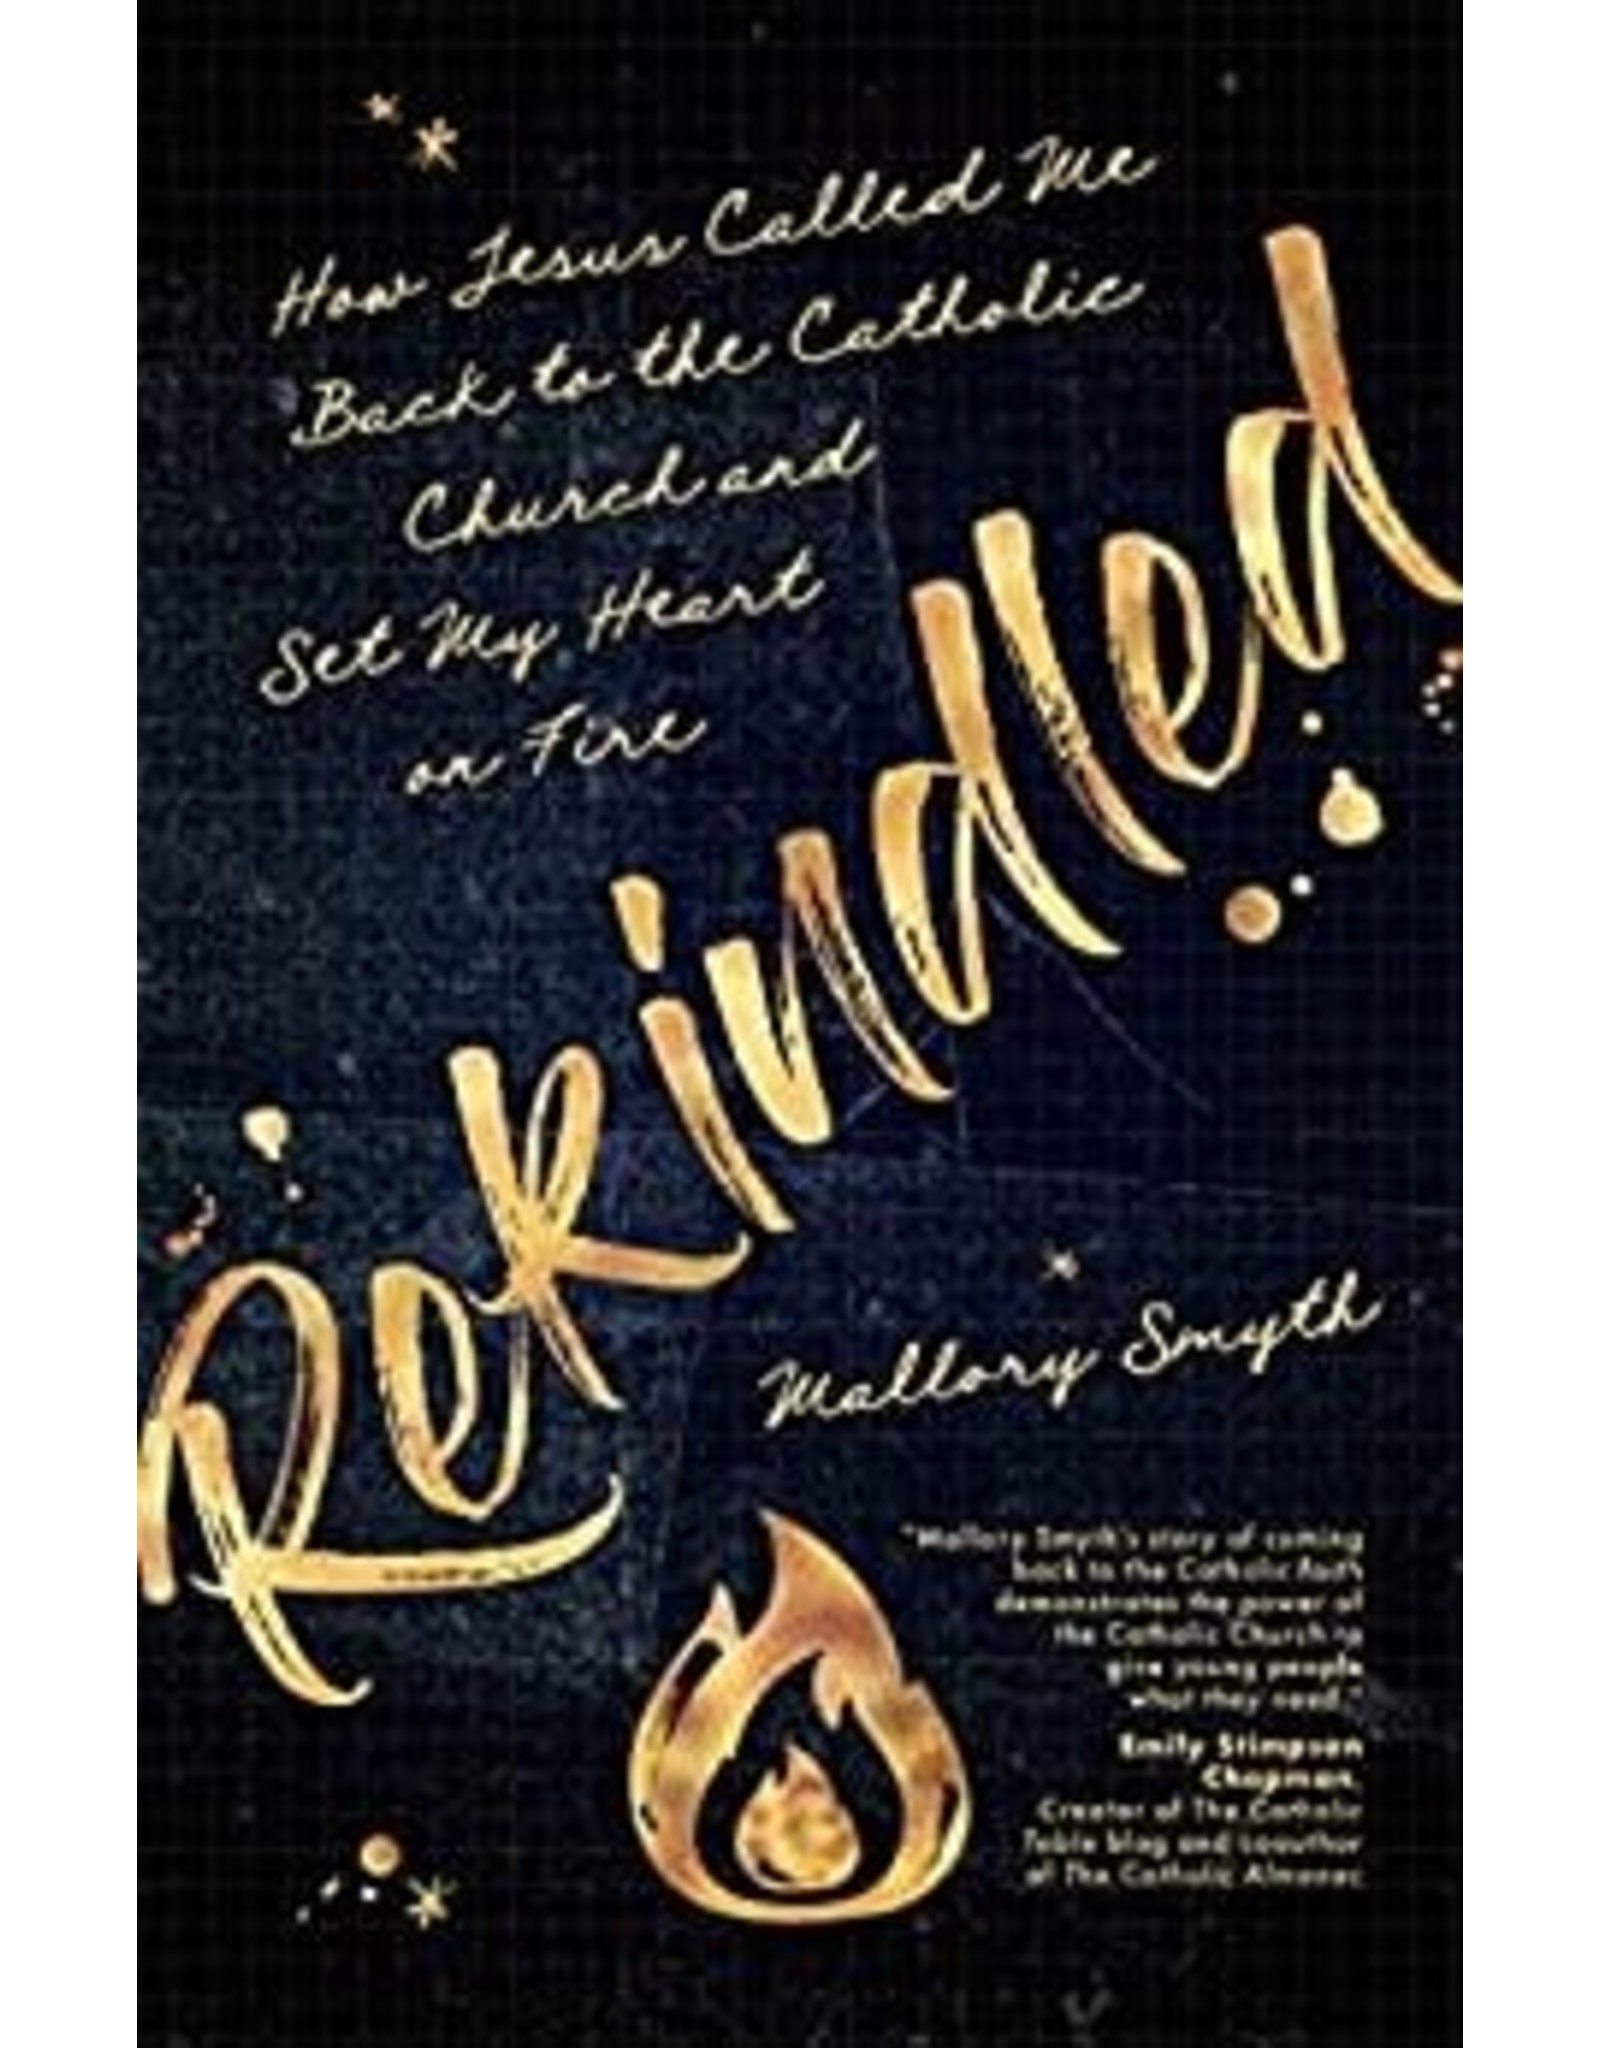 Ave Maria Press Rekindled: How Jesus Called Me Back to the Catholic Church and Set My Heart on Fire by Mallory Smith (Paperback)